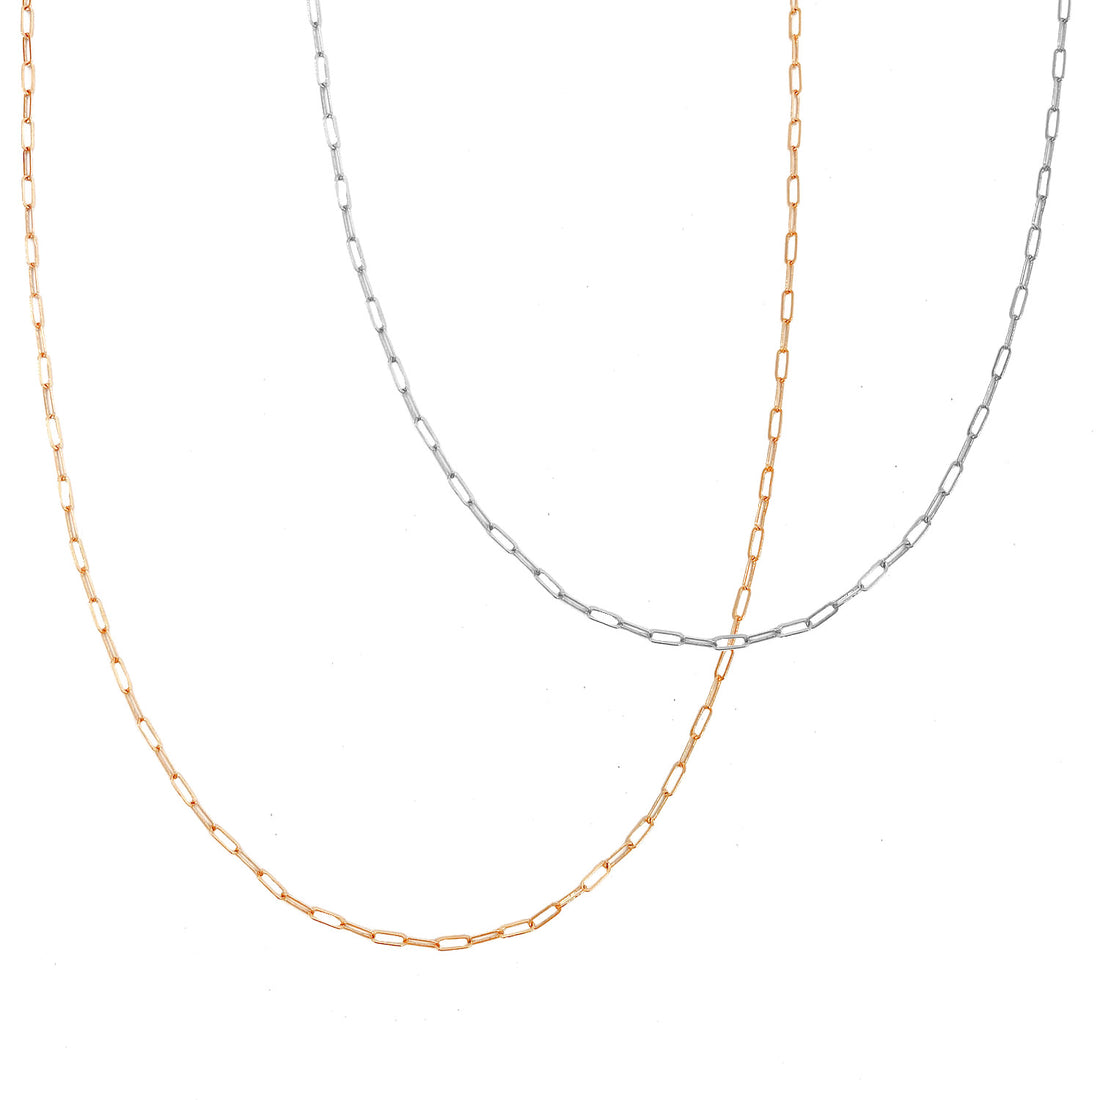 Cara Chain - Gold, Silver, Rose Gold >>